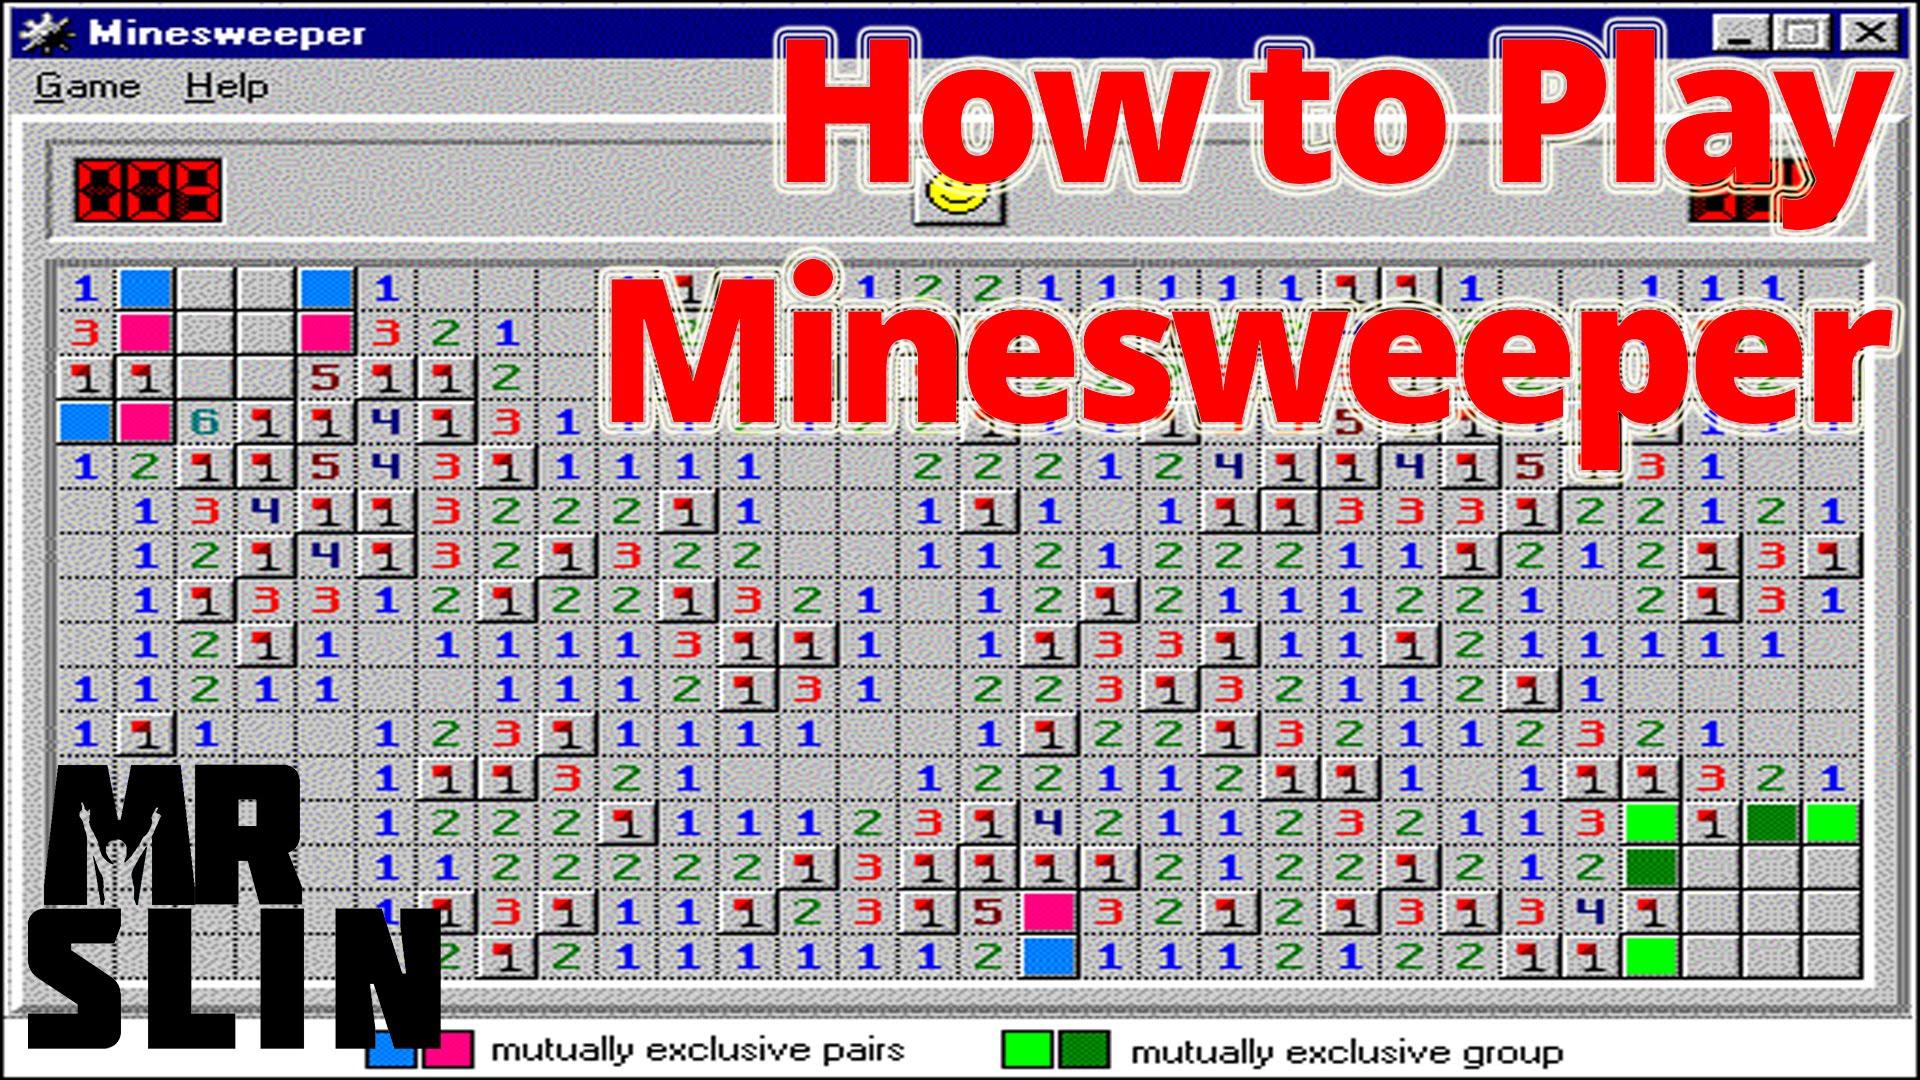 How to Play Minesweeper (Minesweeper) - YouTube